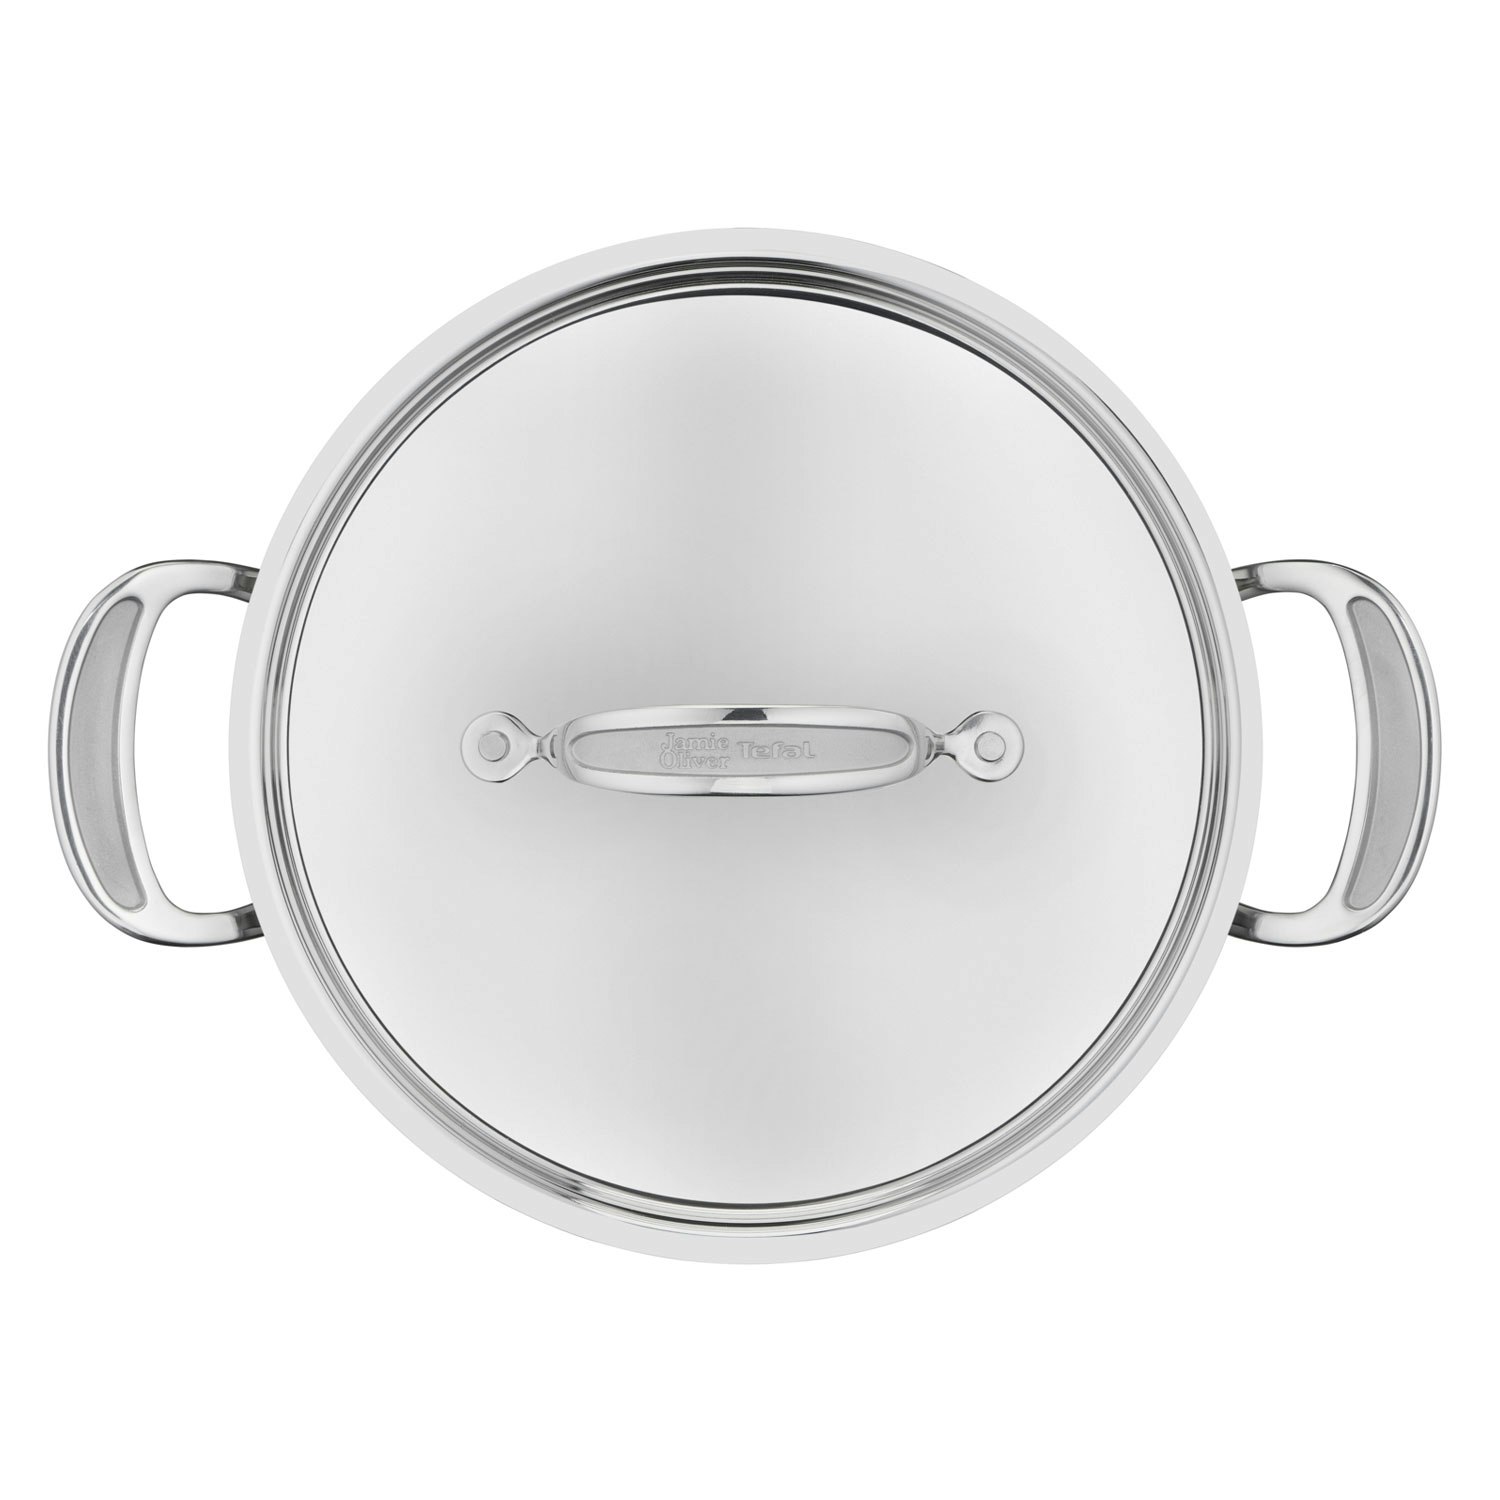 Jamie Oliver Cook's Classic Pot Stainless Steel, 24 cm / 5,2 L